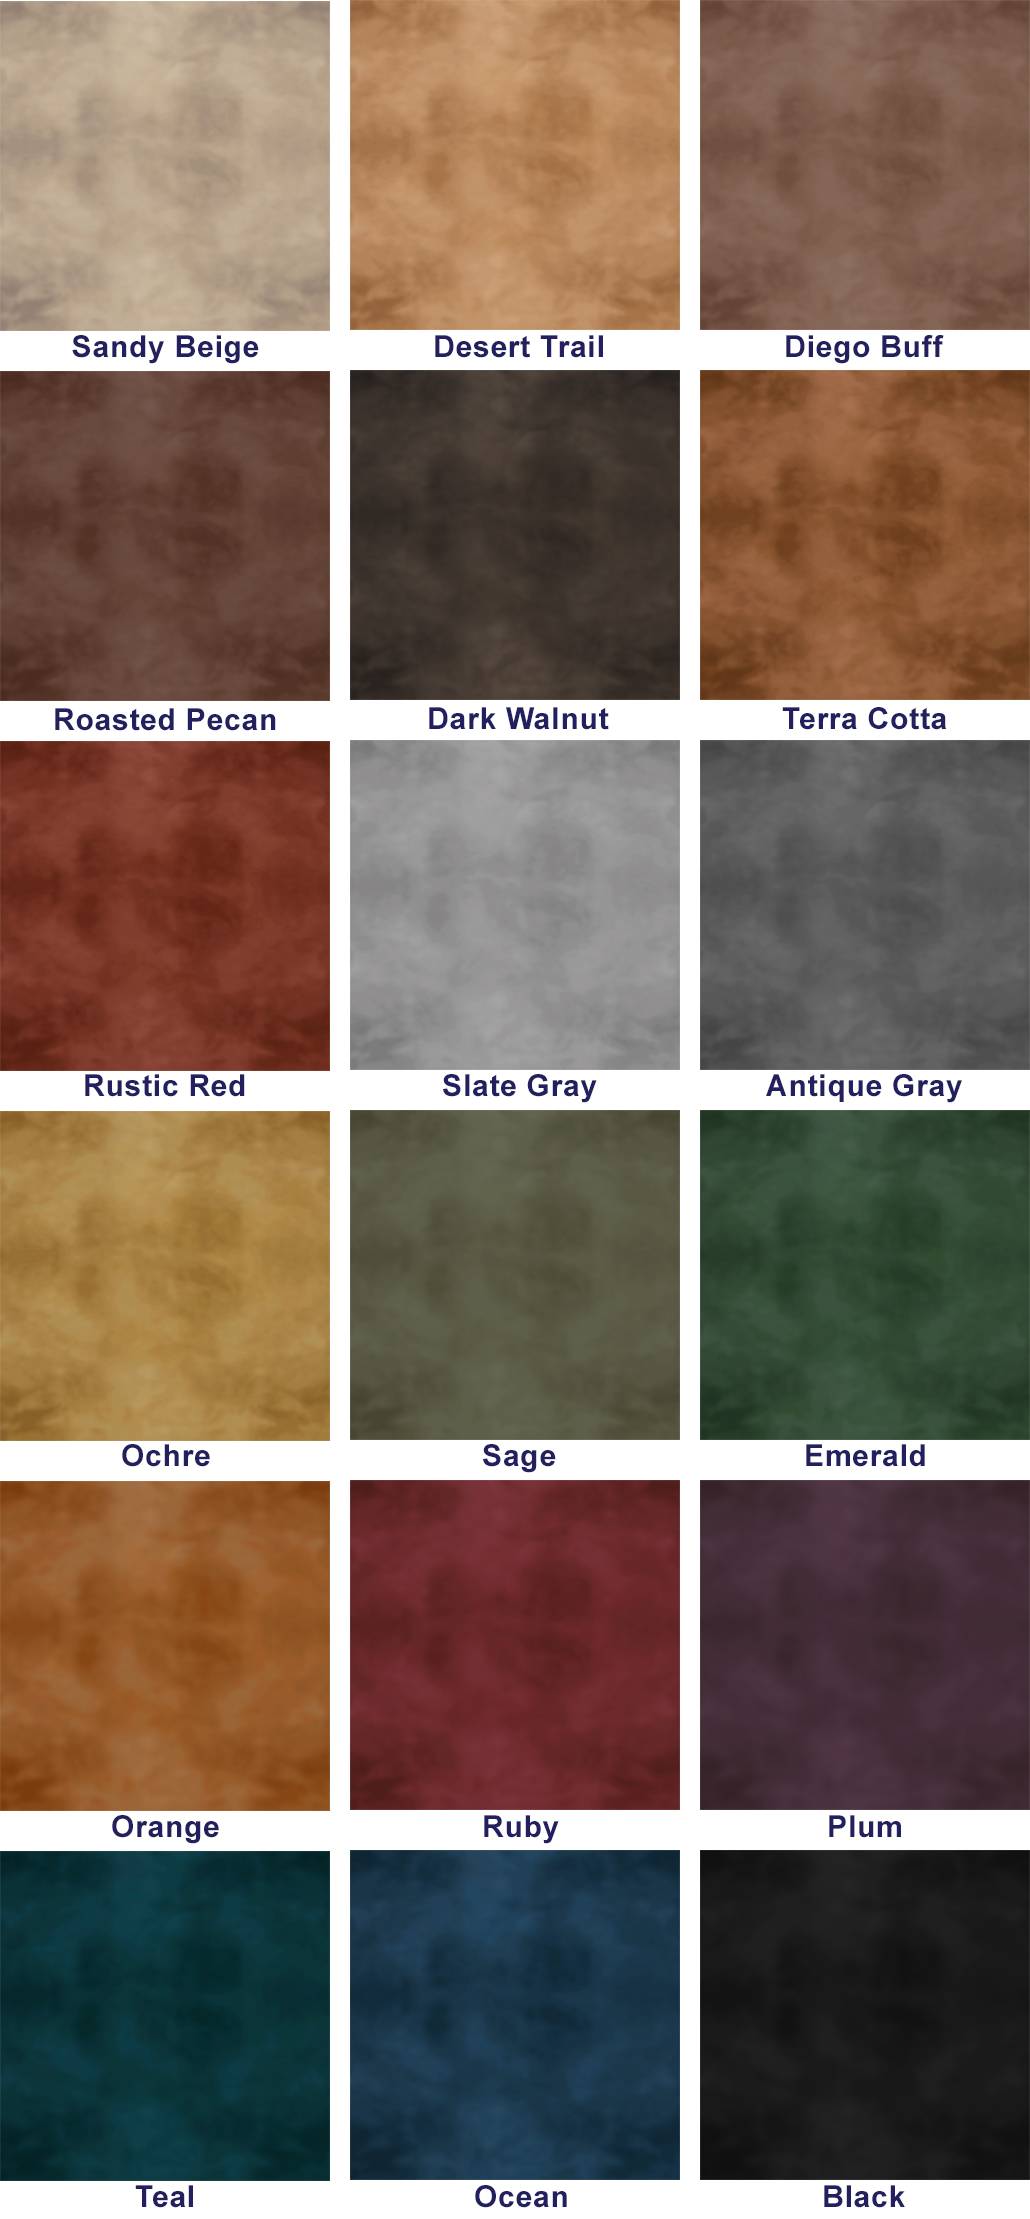 A color swatch of the decorative concrete stain colors available for a mottled or uniform application.